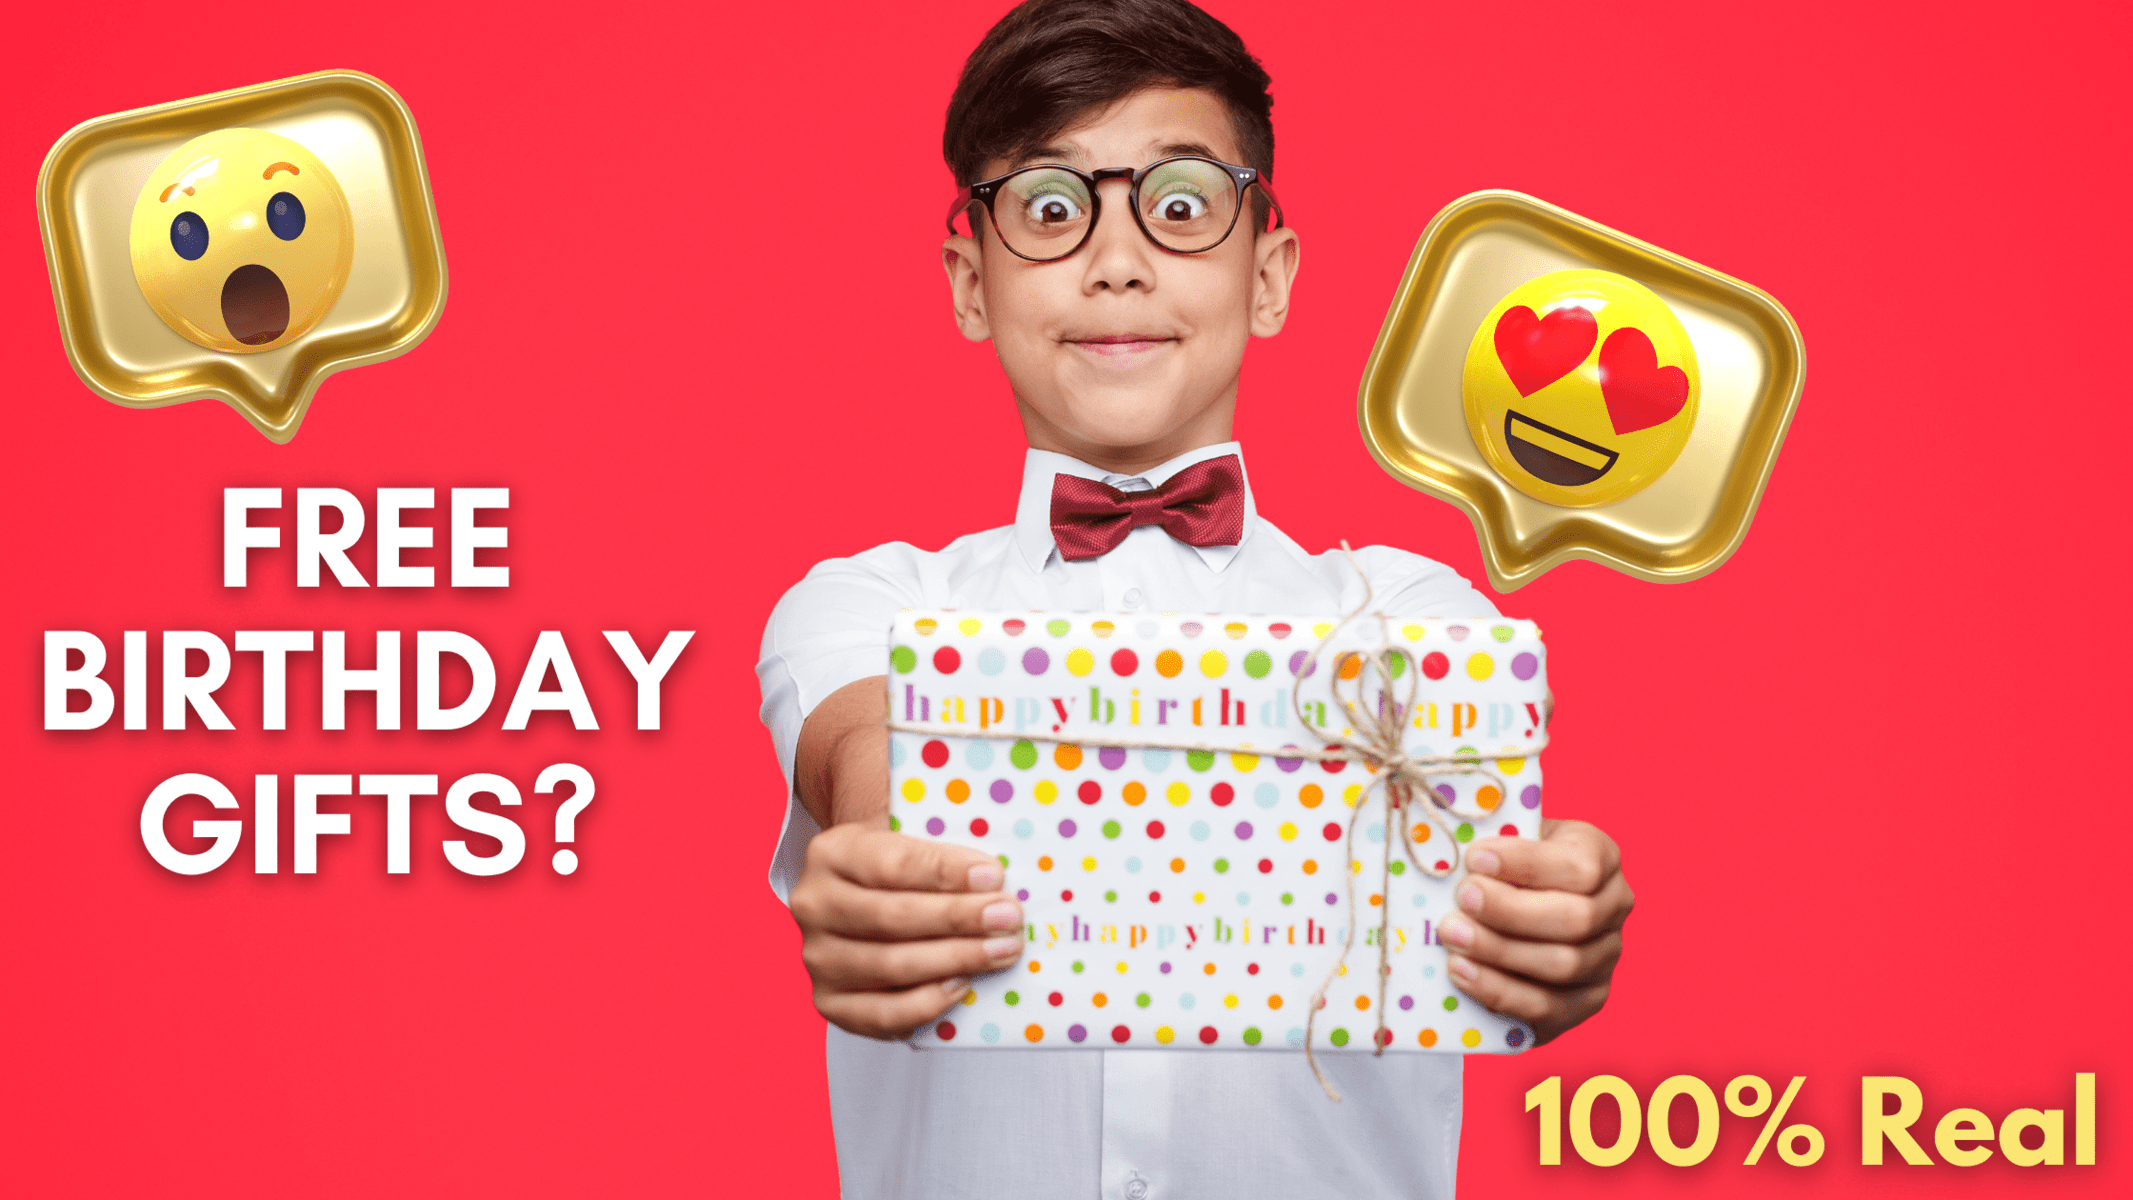 Here’s How to Get Free Birthday Gifts in India – 100% Real